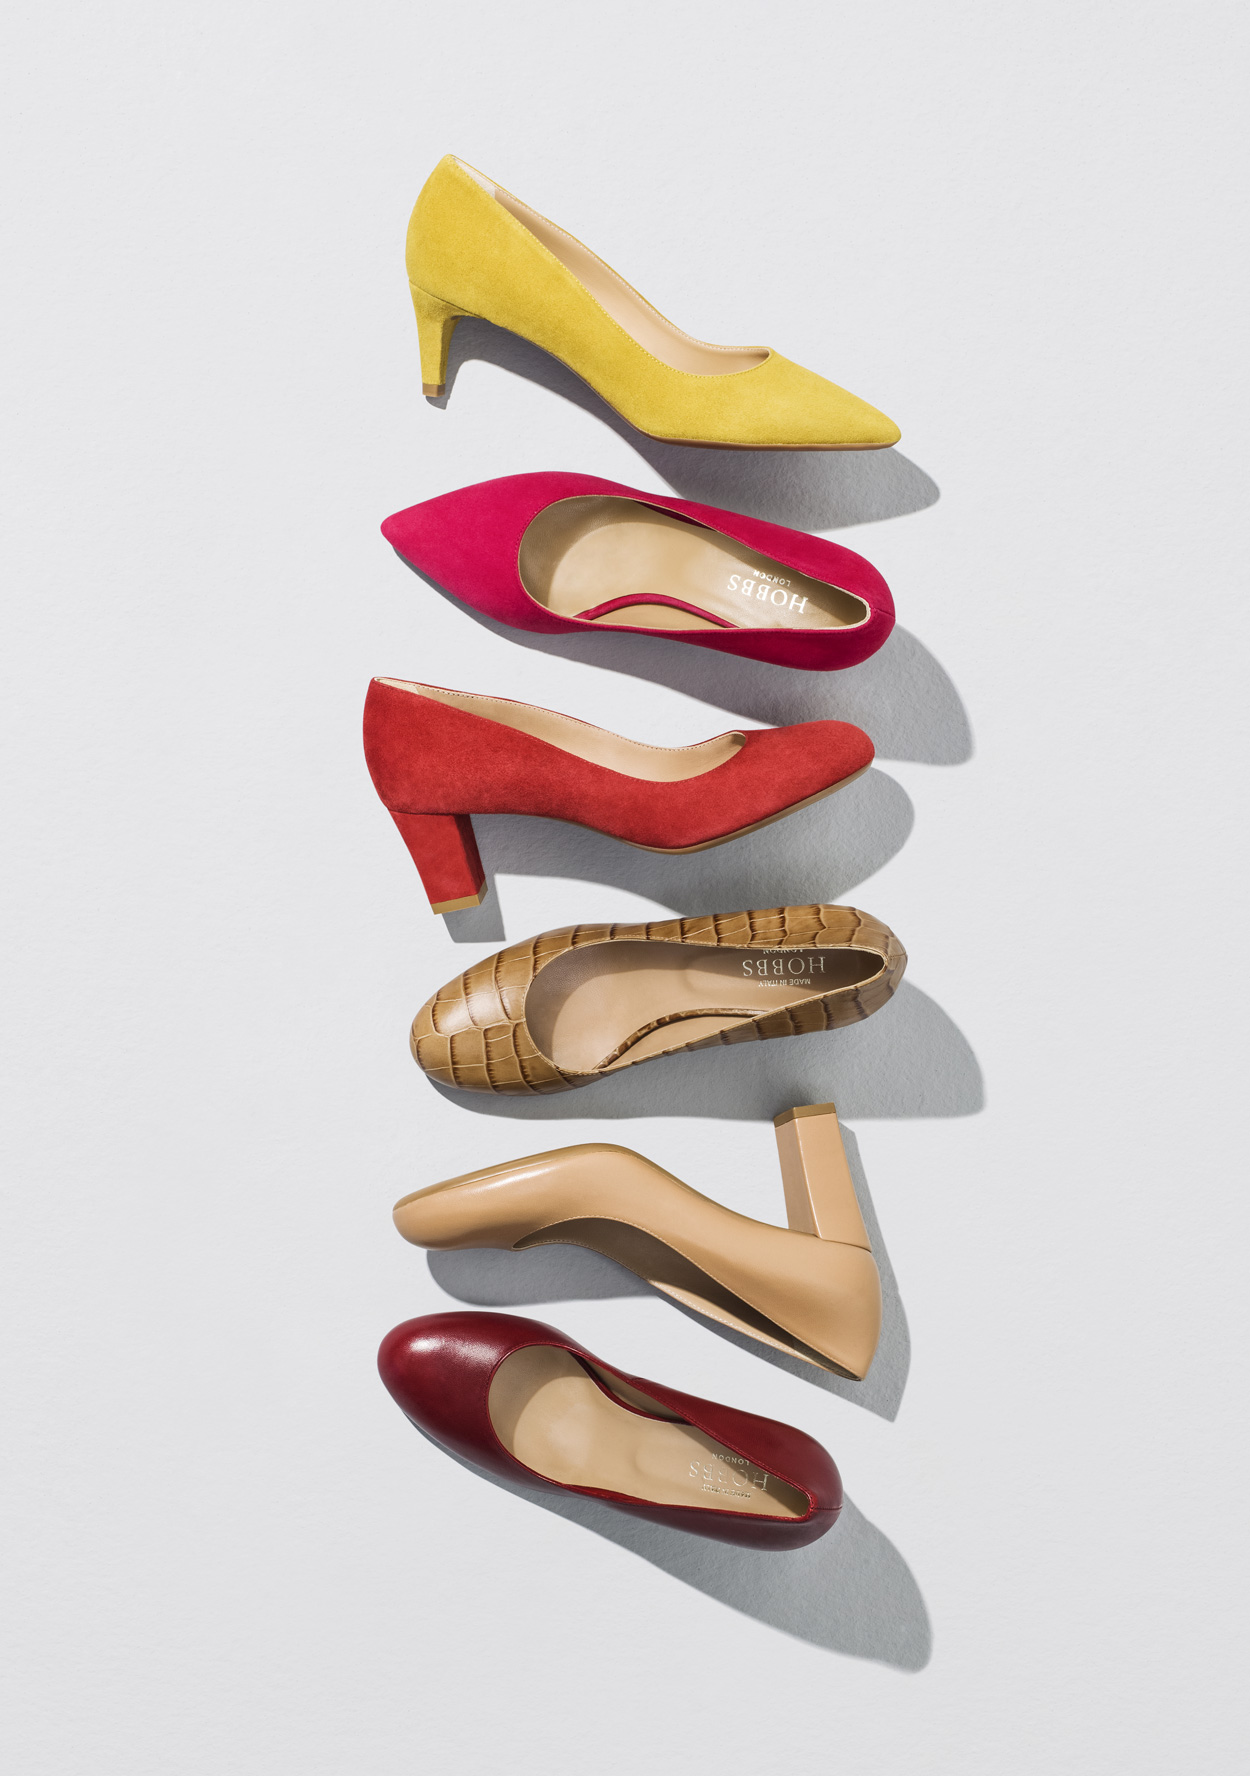 Hobbs court shoe collection. Available in wear-to-work friendly colours such as nude, navy and black.